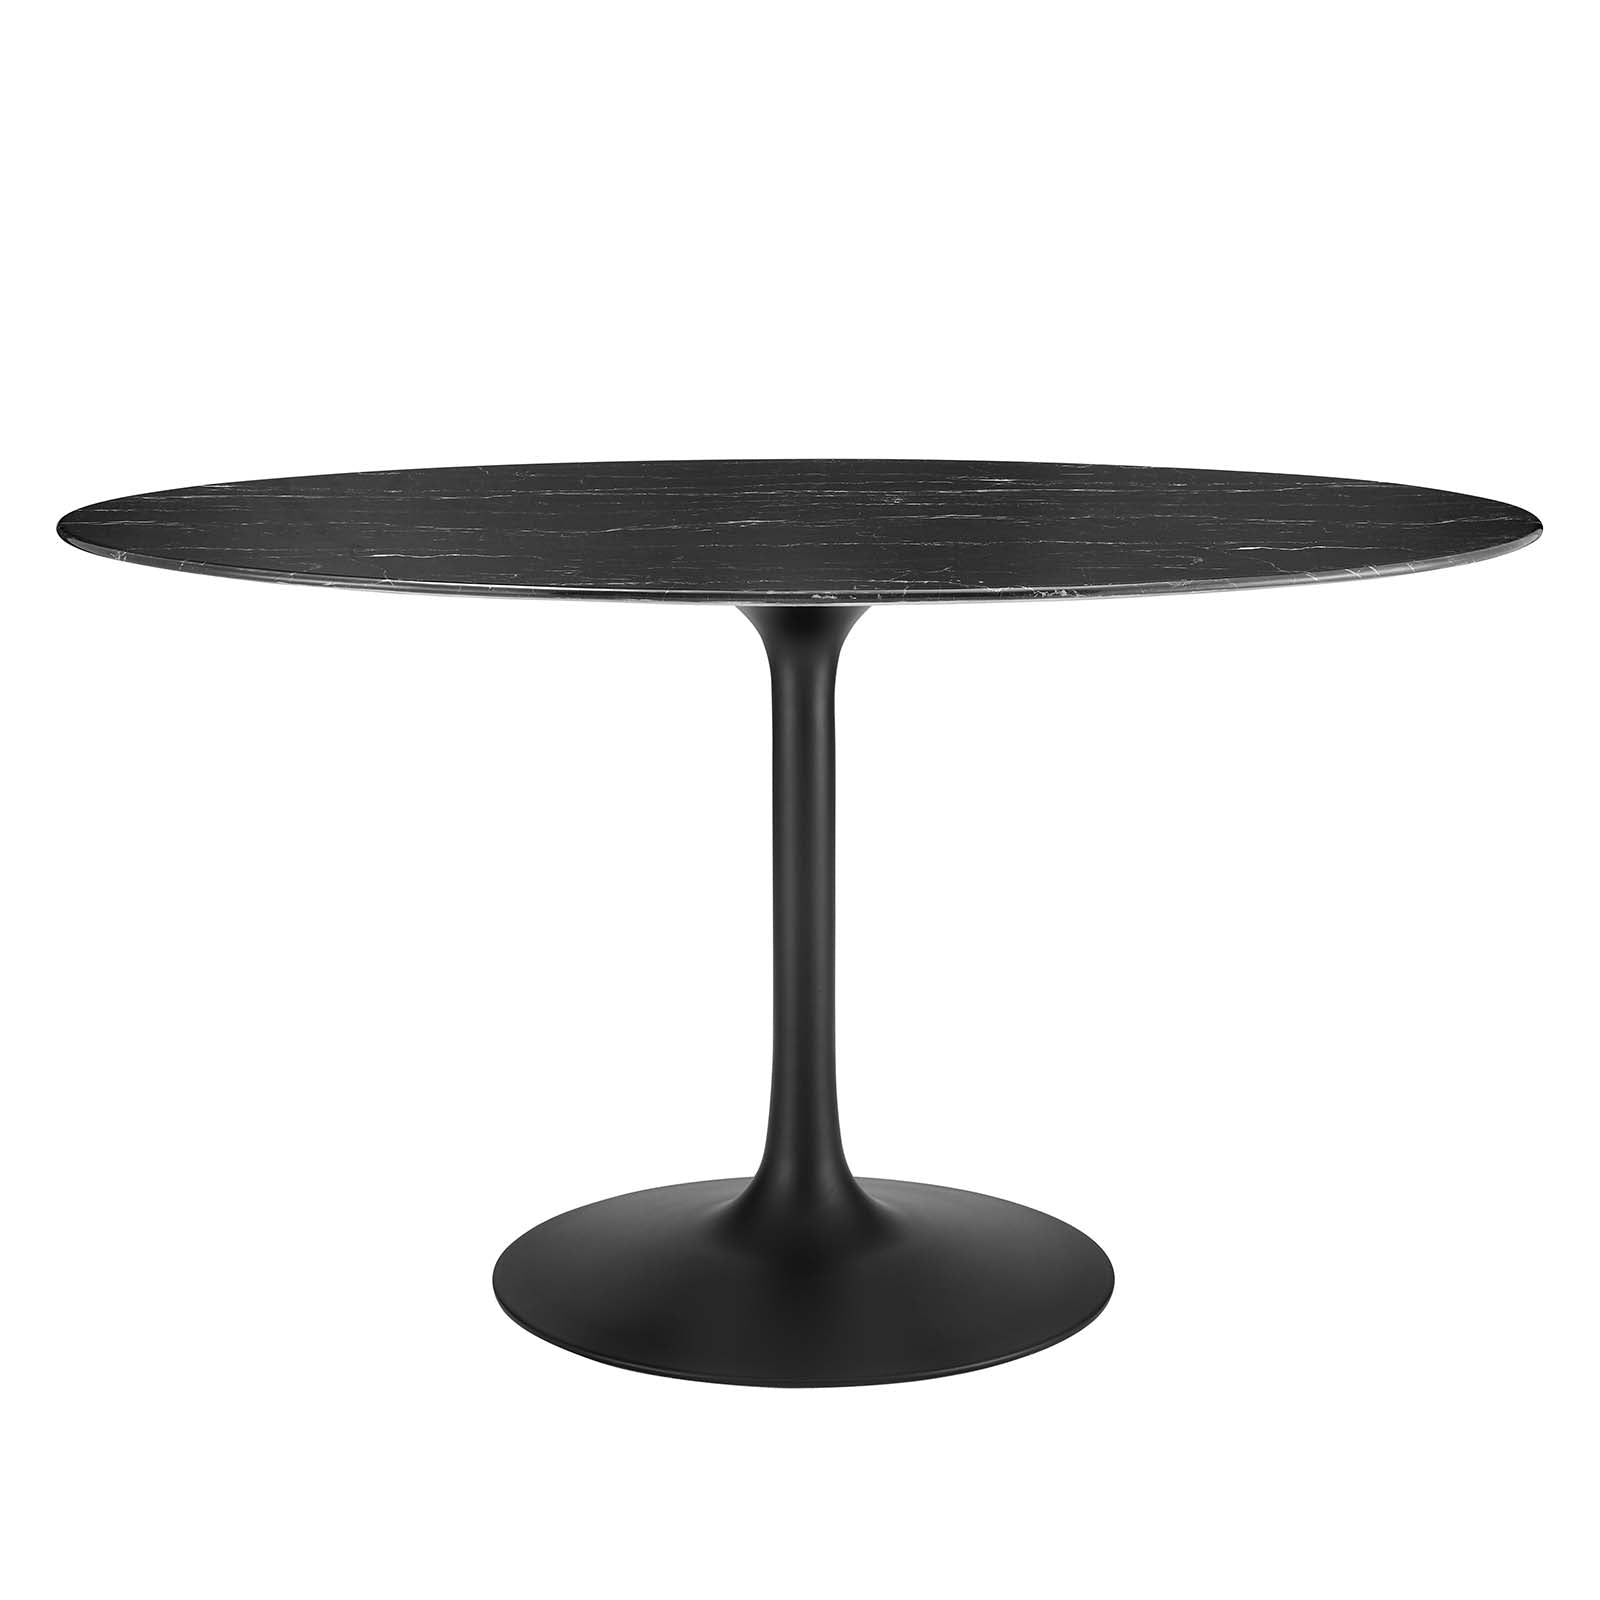 Lippa 54" Artificial Marble Oval Dining Table